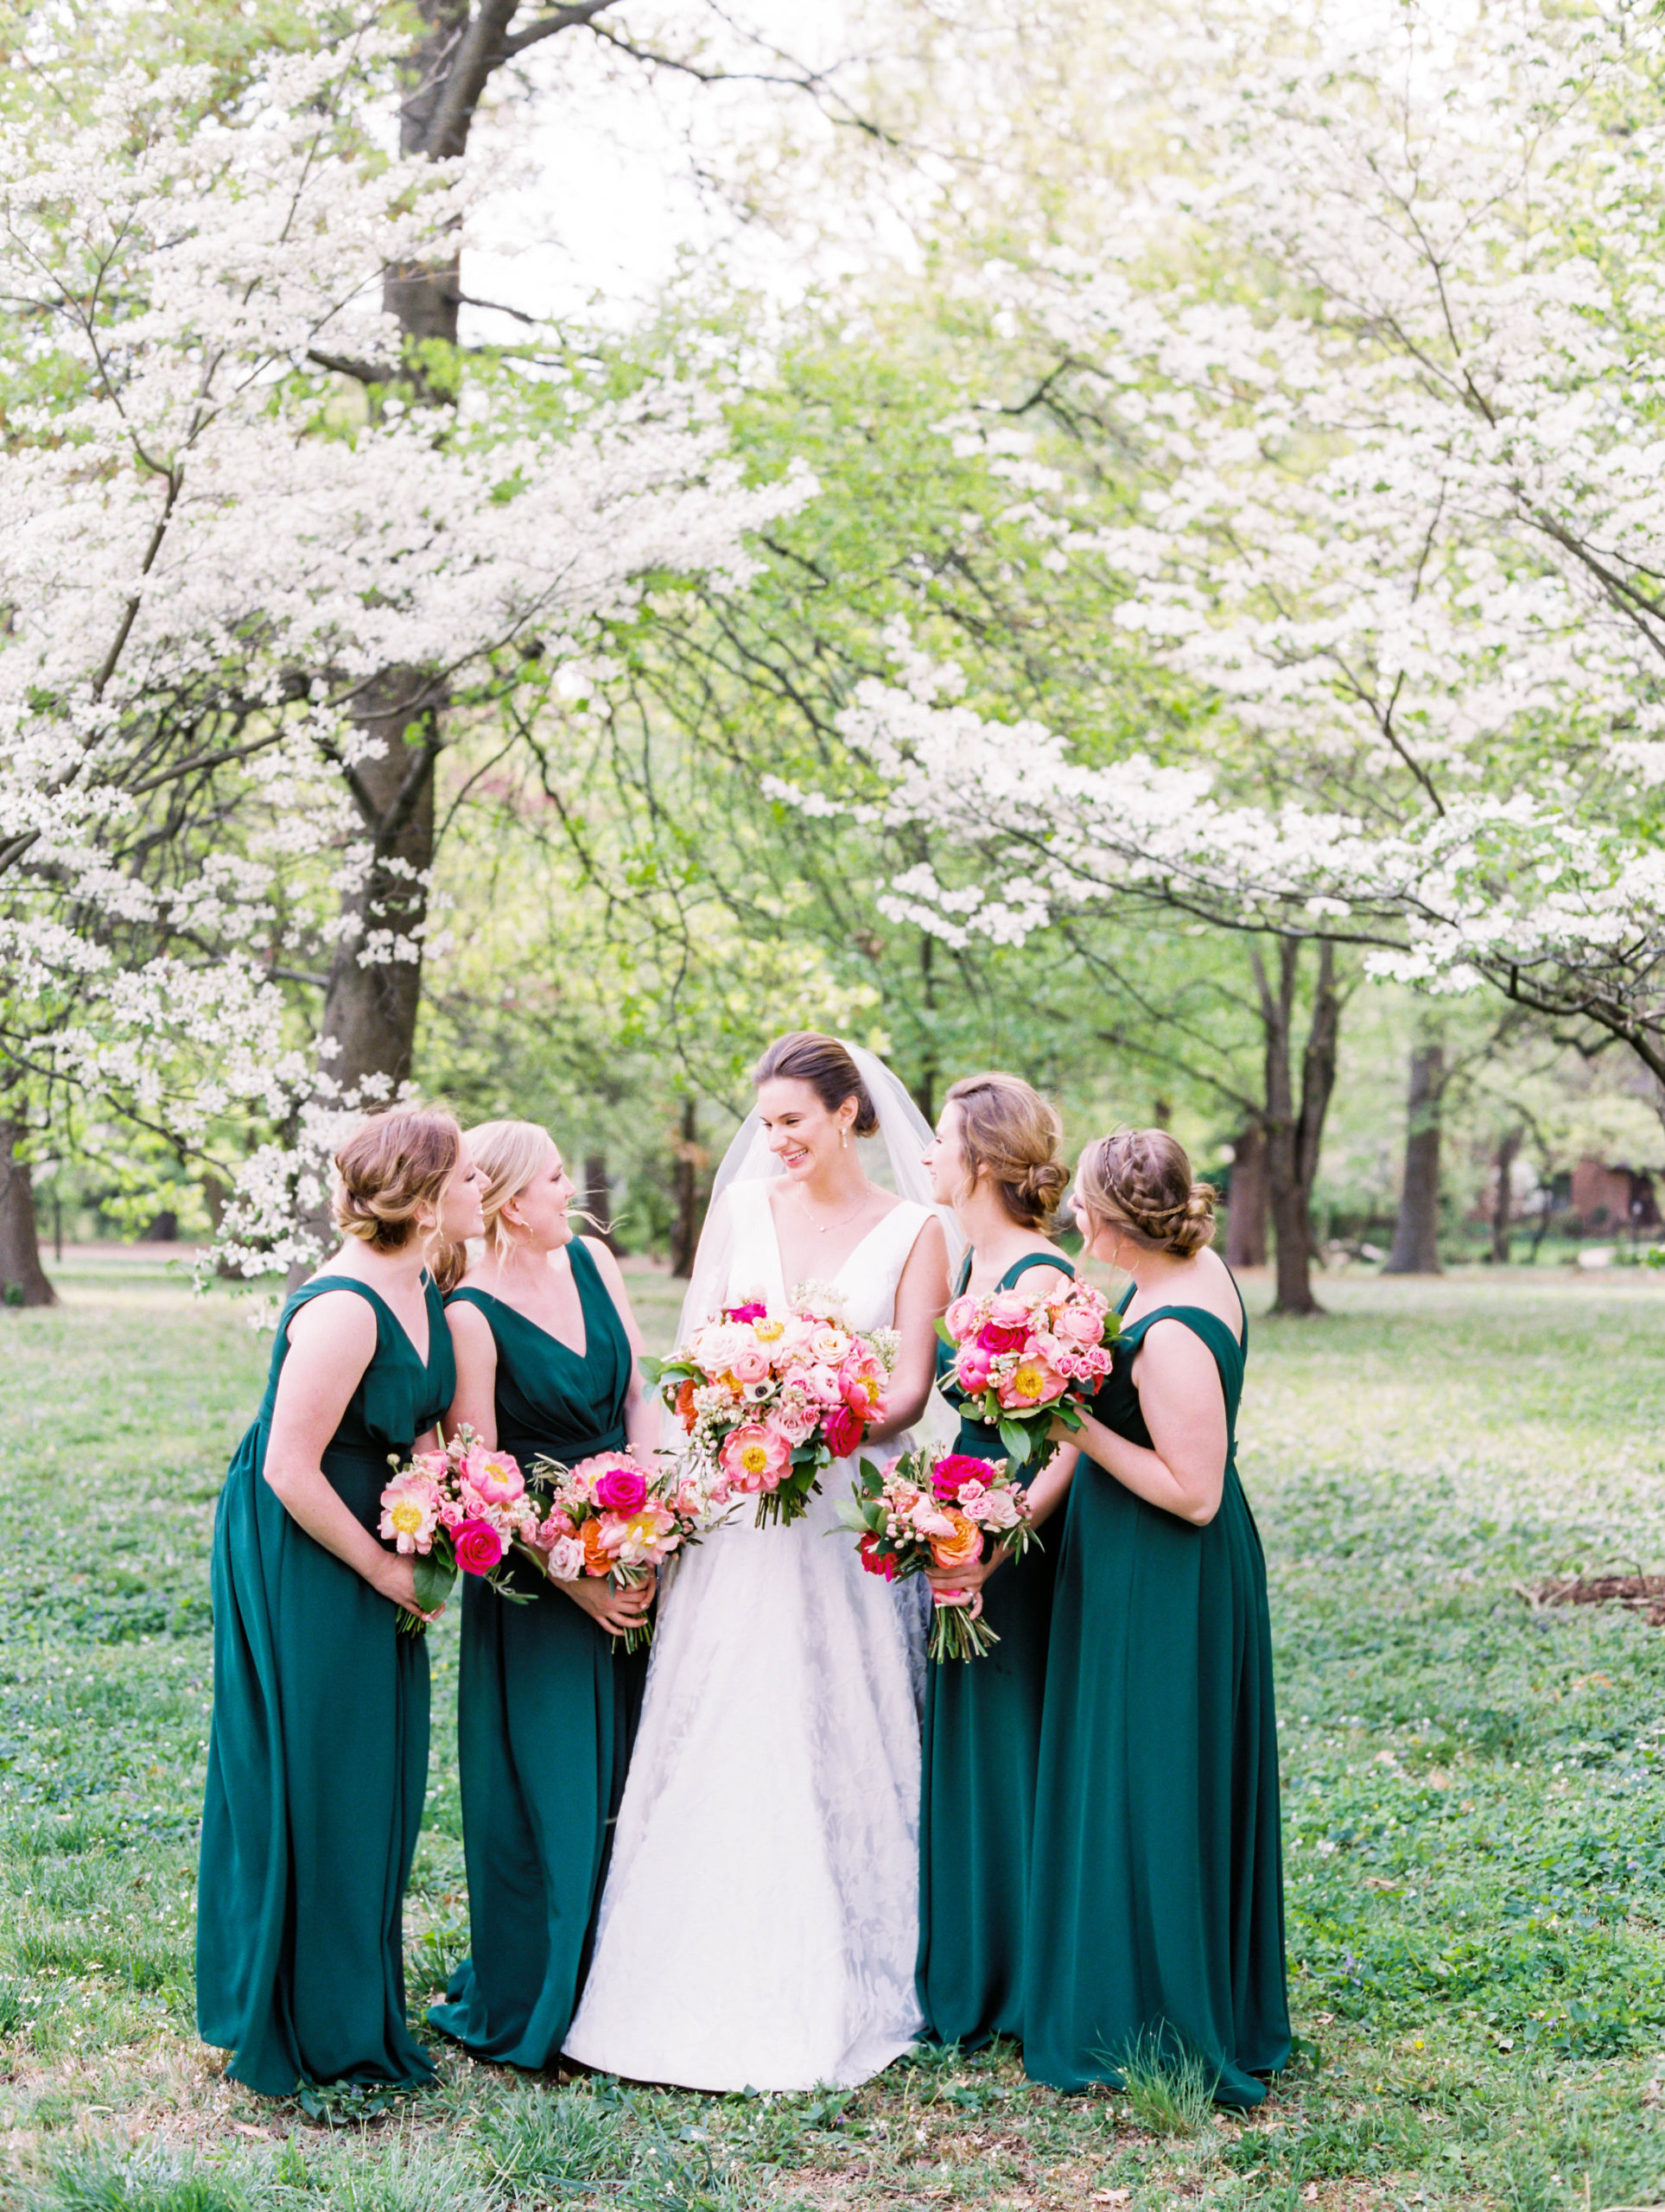 St Louis spring wedding with pink bouquets and green bridesmaid dresses